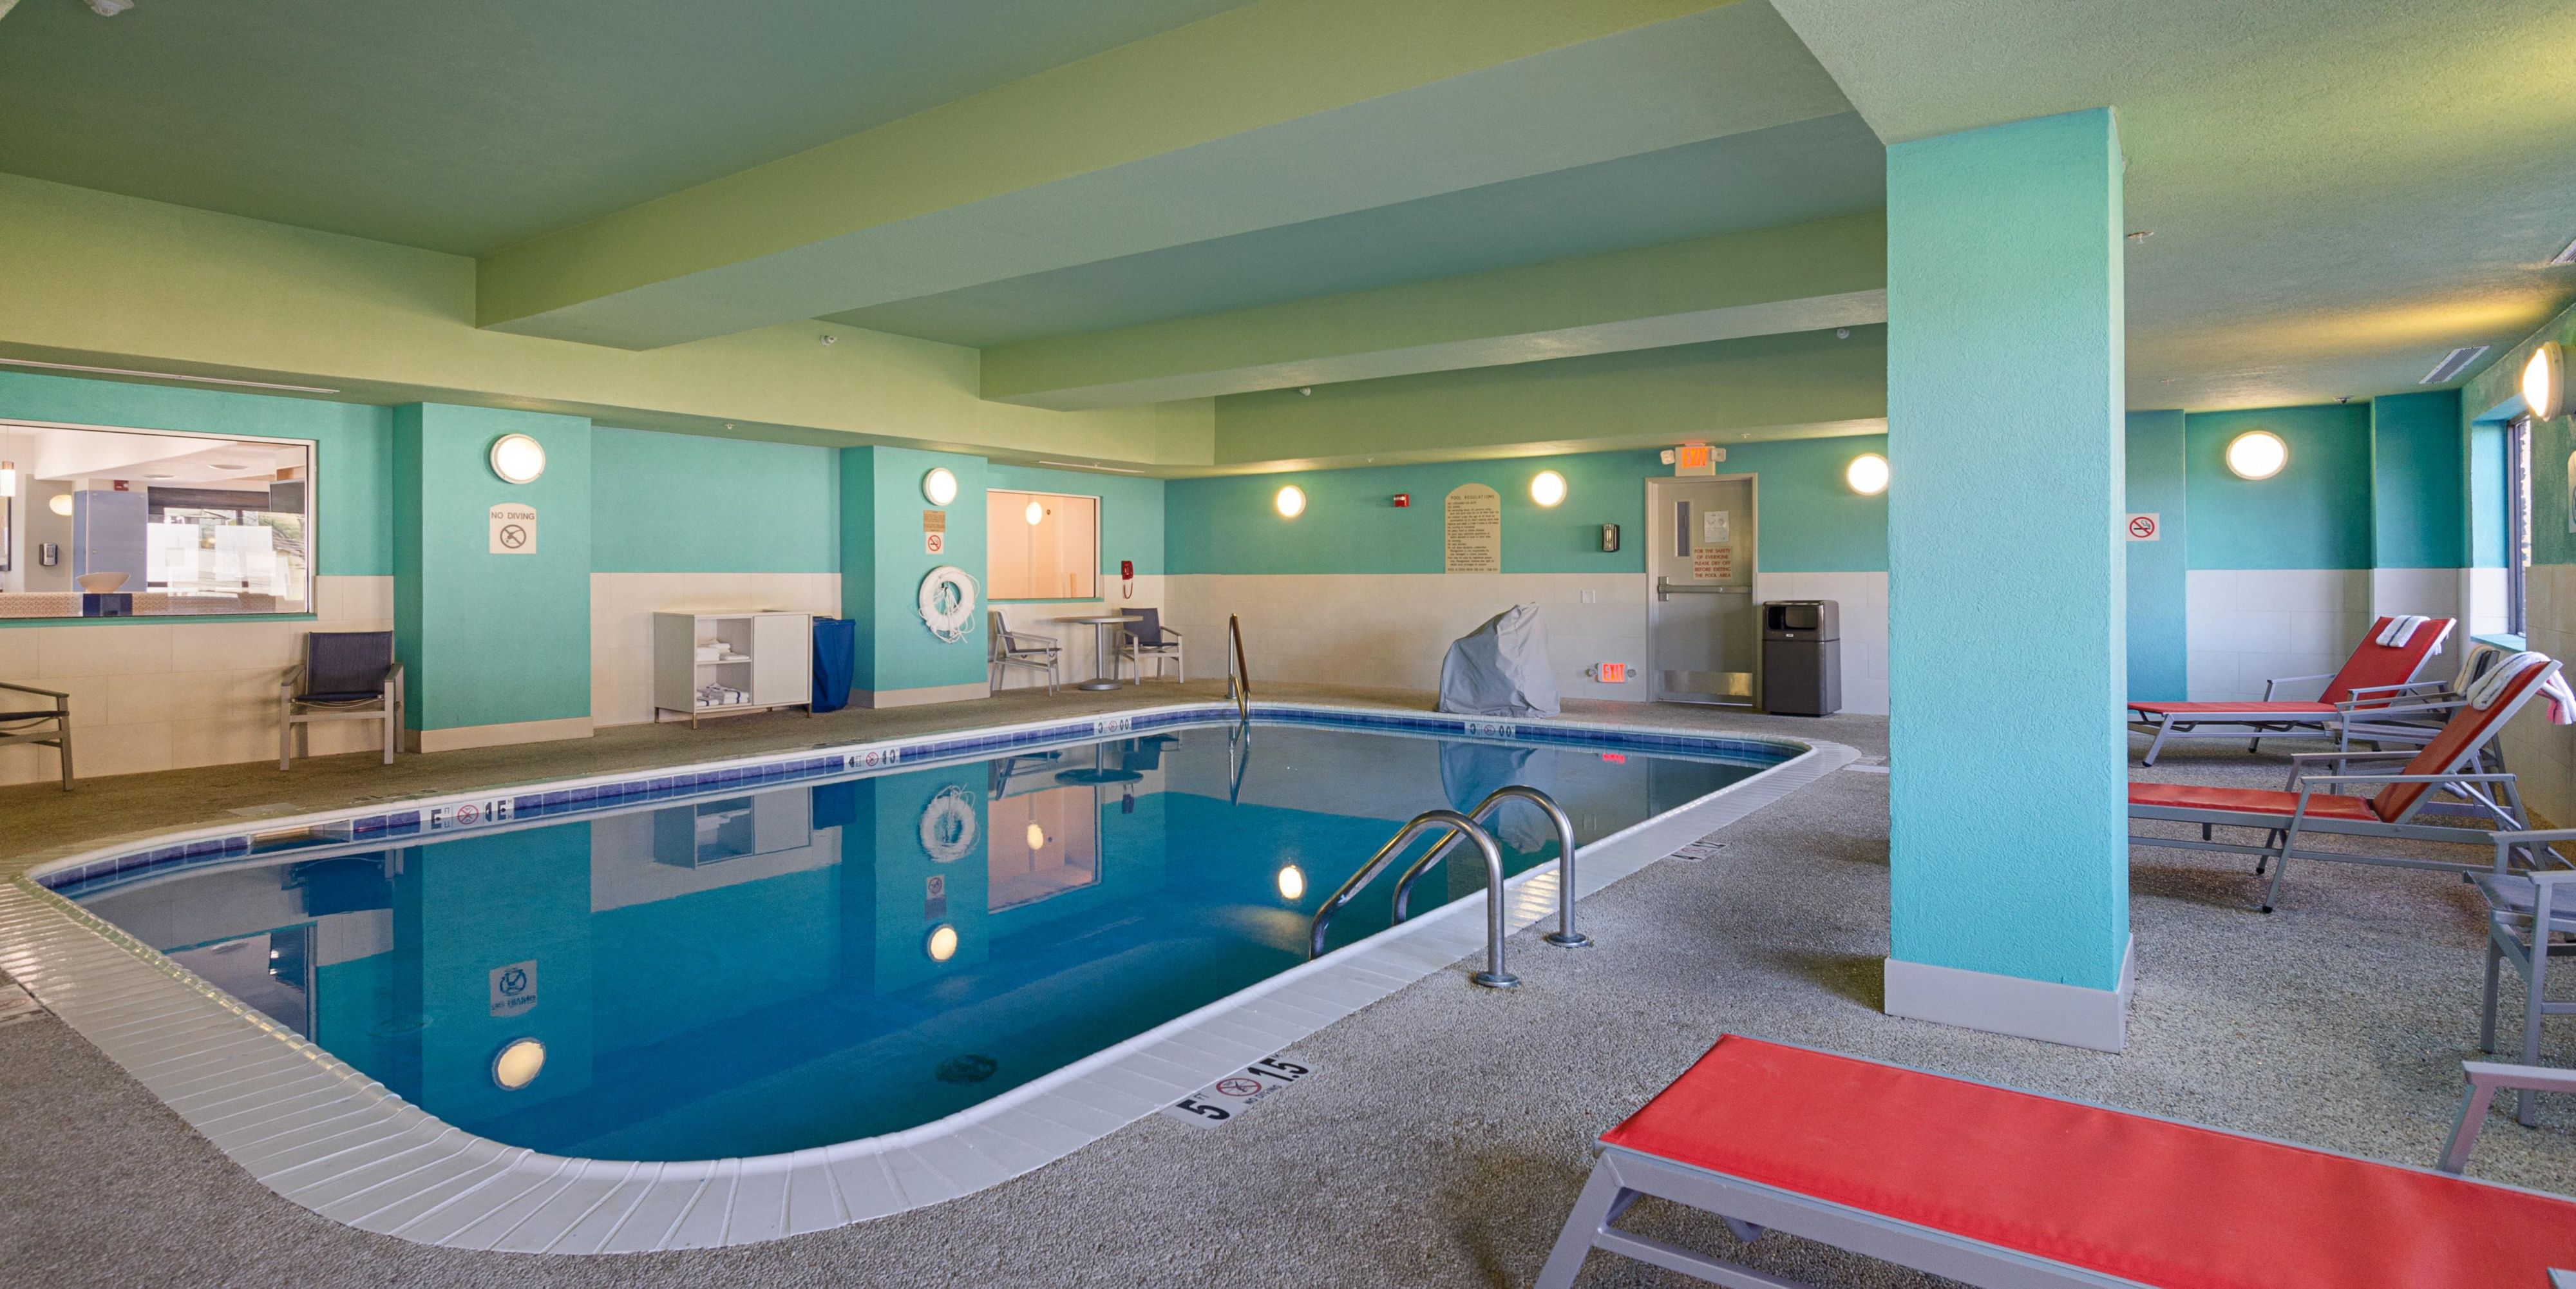 Whether on business or leisure, you can relax year round in our newly renovated pool.